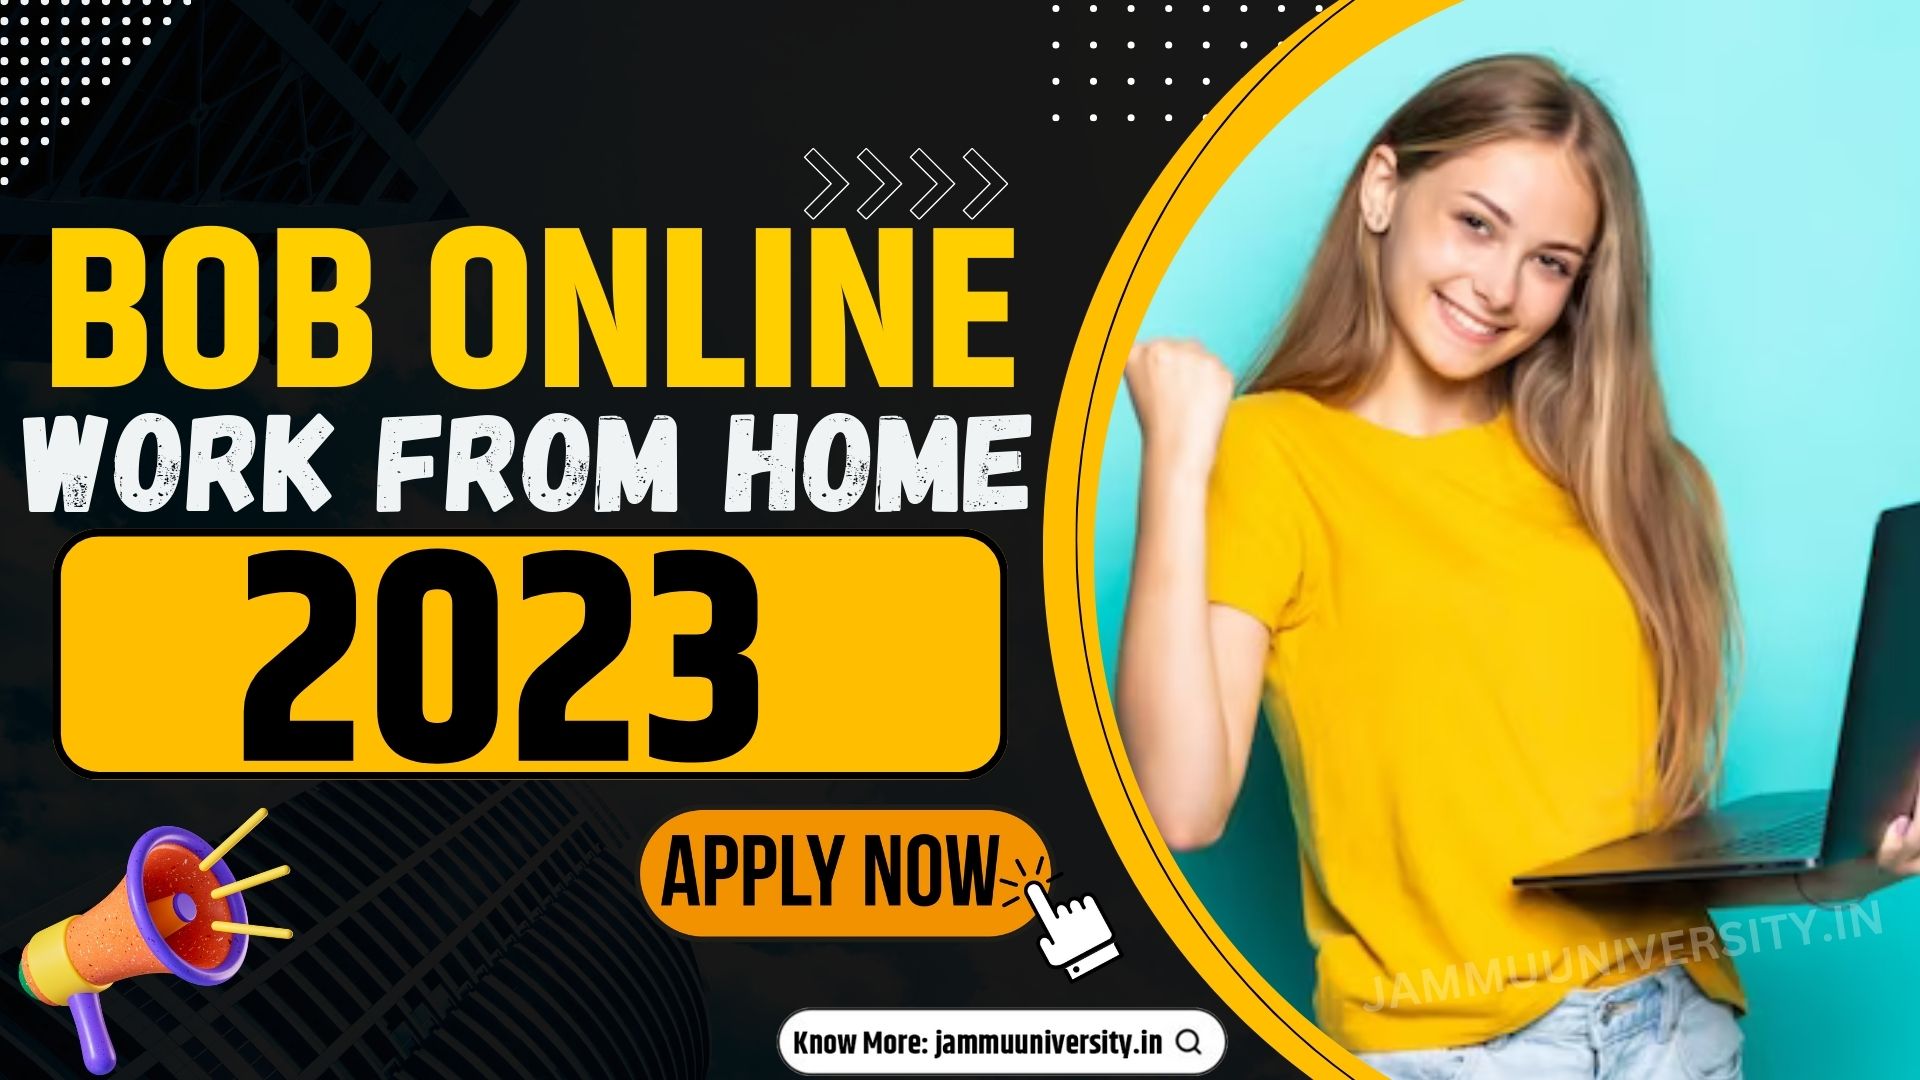 BOB Online Work From Home